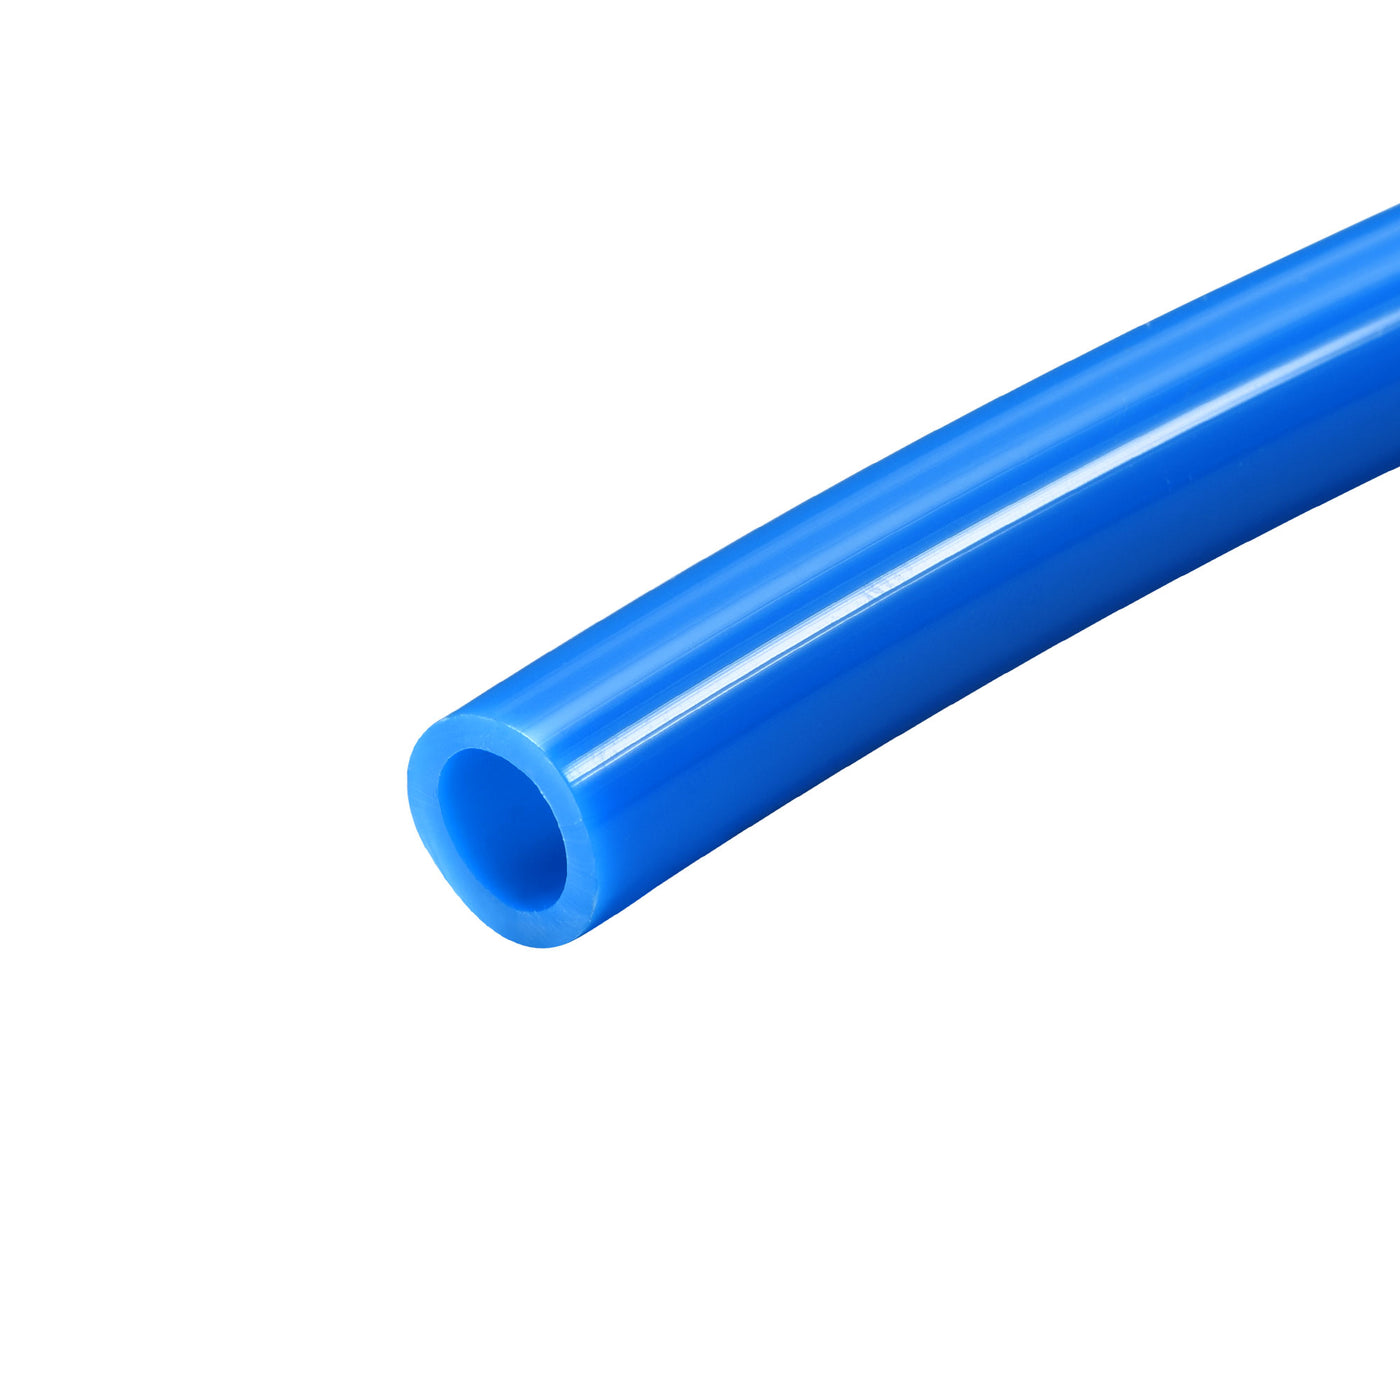 uxcell Uxcell Pneumatic Air Hose Tubing PU Air Compressor Tube 8mm/0.3''ID x 12mm/0.5''OD x 10m/32.8Ft Polyurethane Pipe Blue with 7 Type Connect Fittings